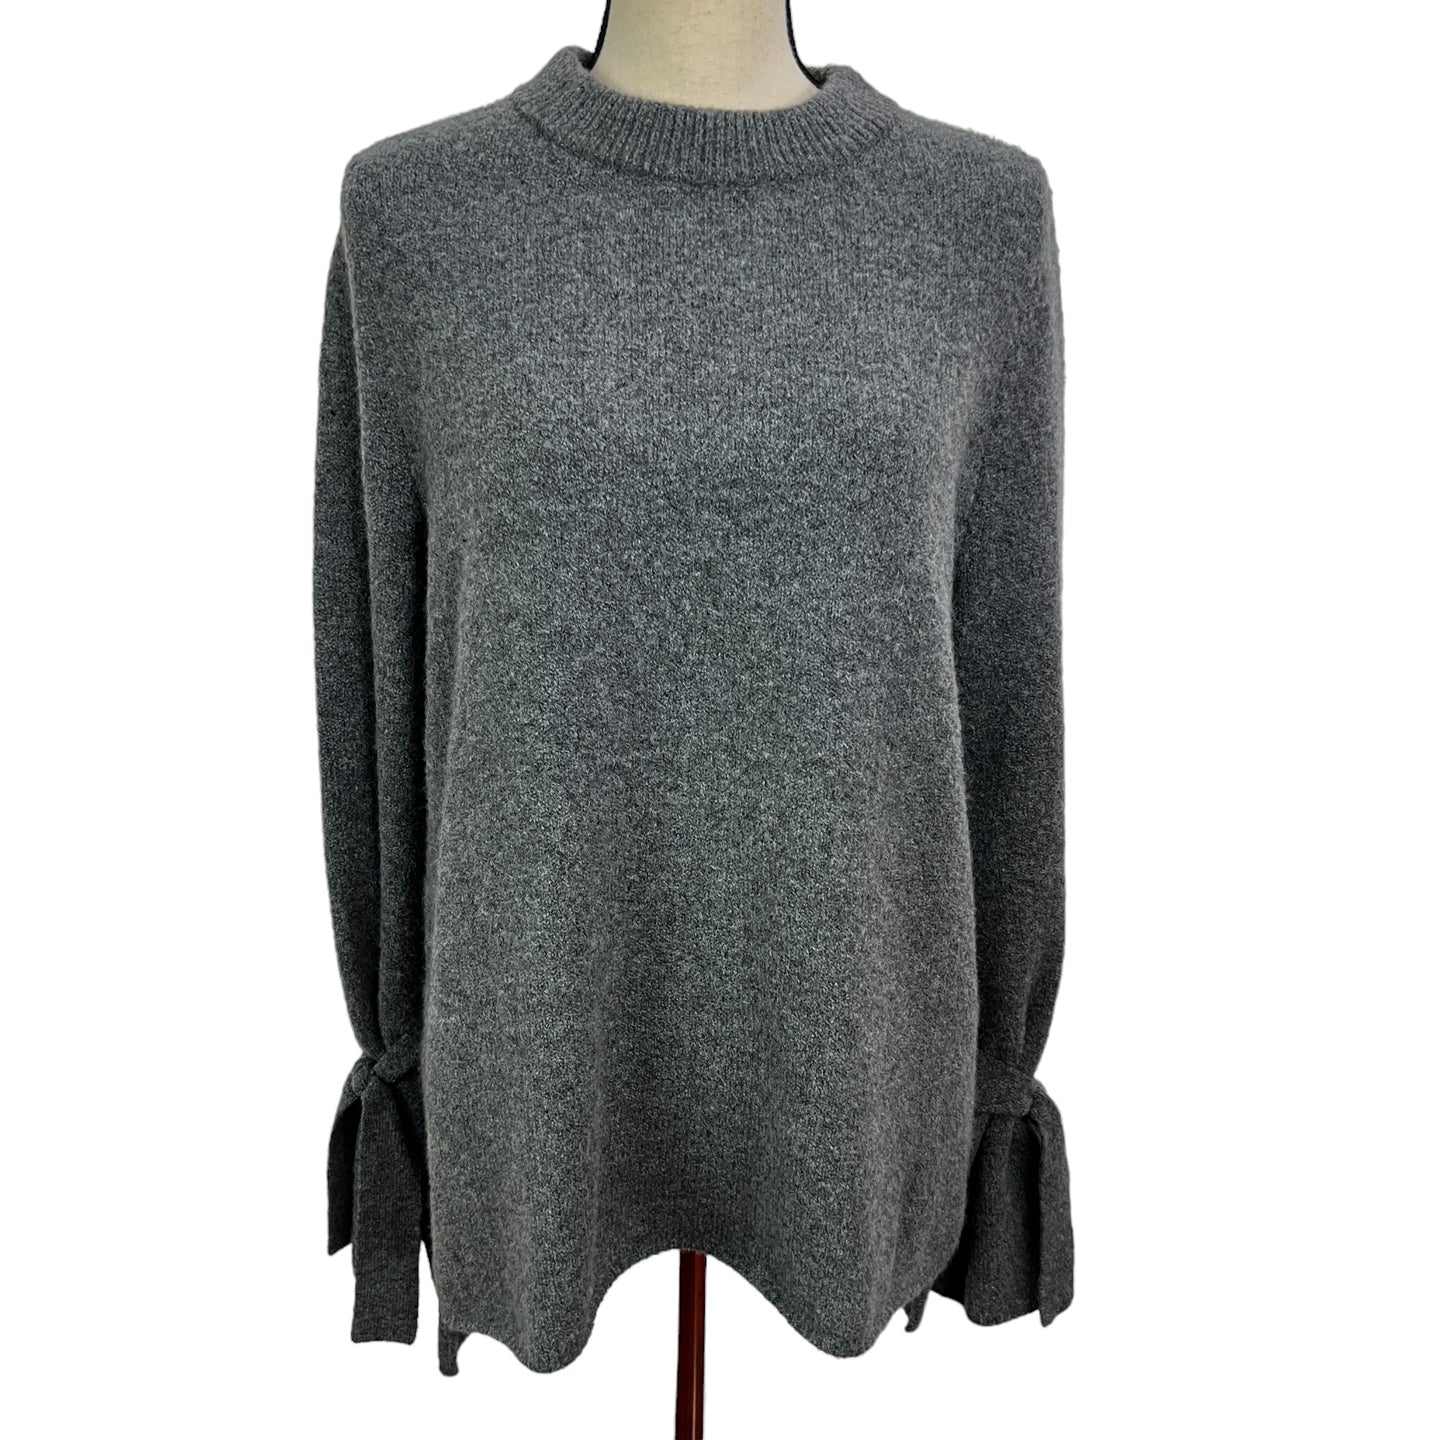 Gray Wool Blend Pullover Women's Sweater Size Small